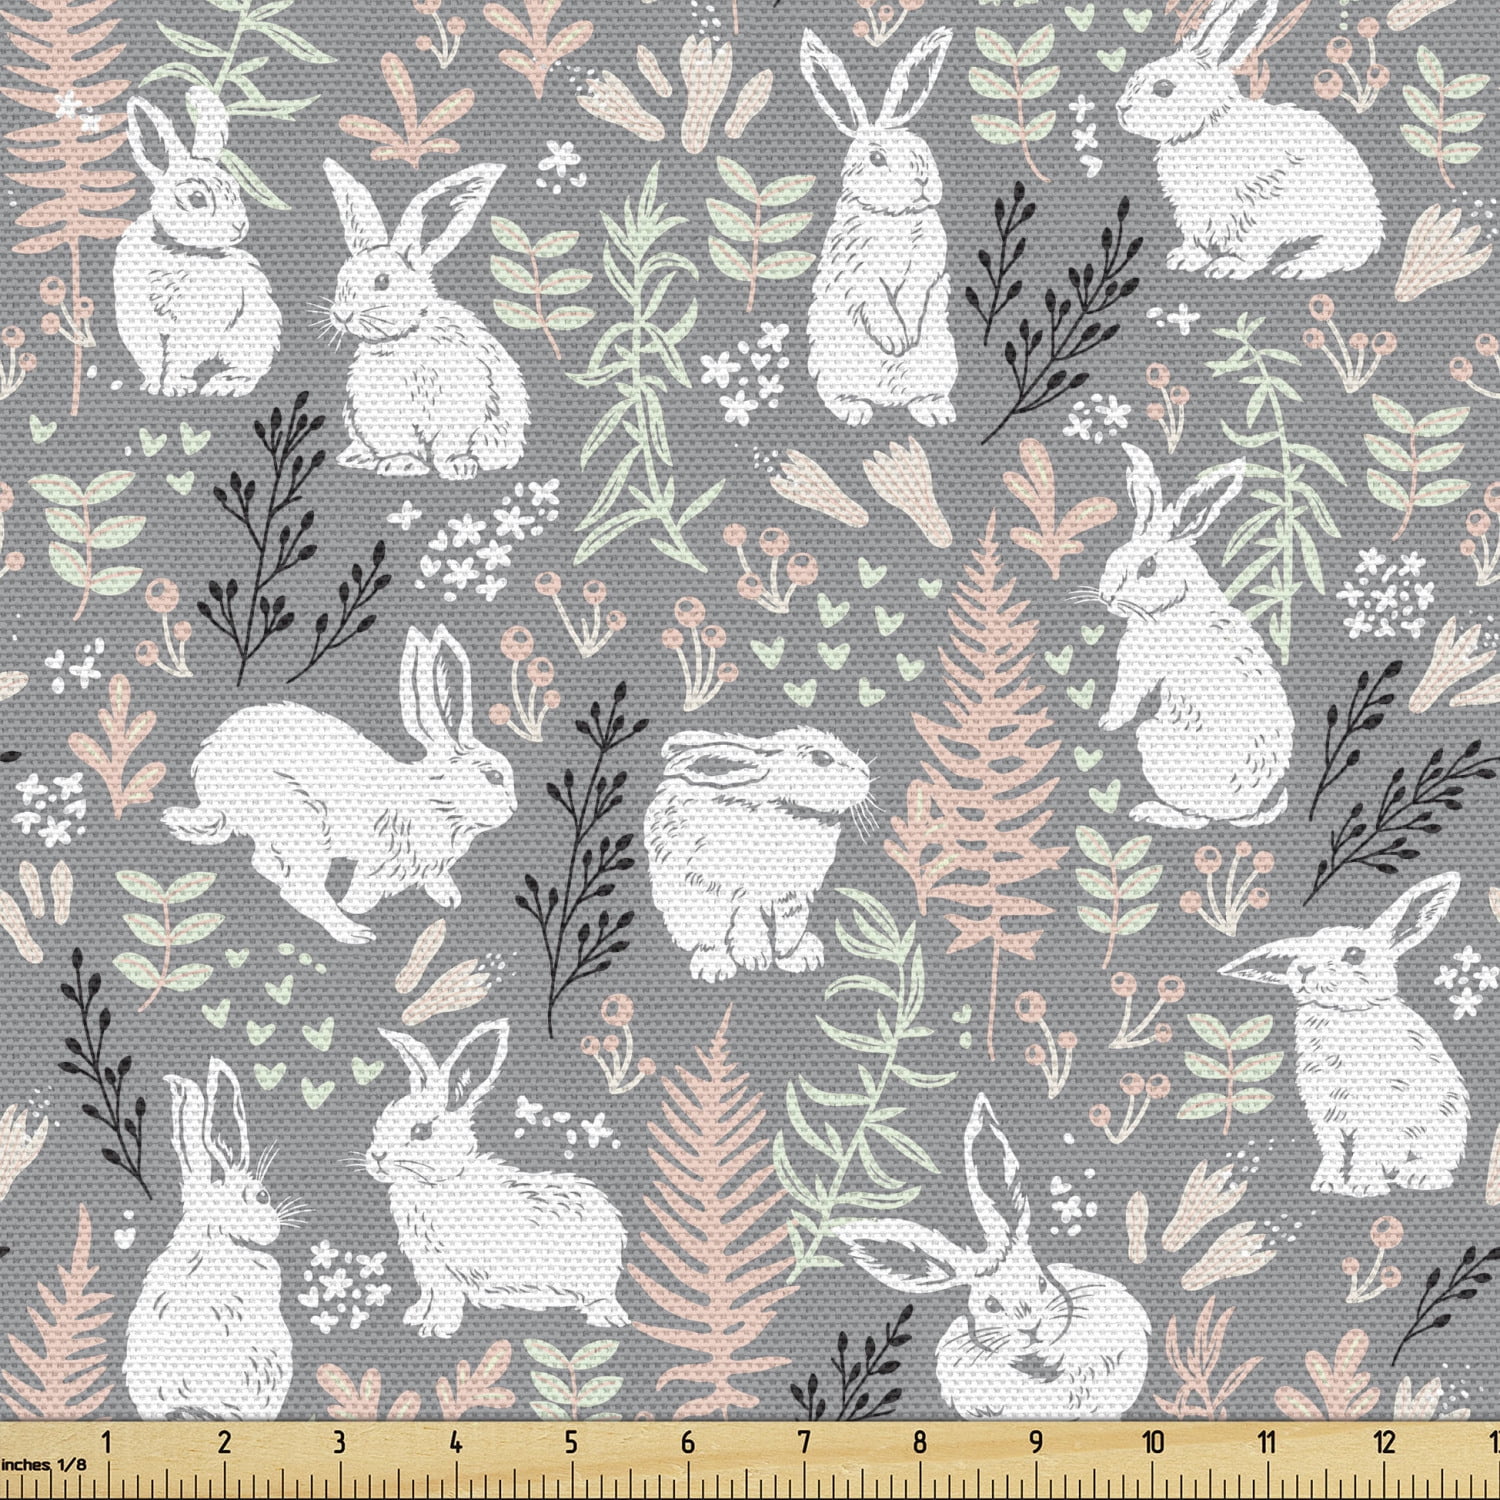 Bunny Upholstery Fabric by the Yard, Nature Inspired Pattern Drawn by Hand  with White Hares Hearts and Floral Elements, Decorative Fabric for DIY and  Home Accents, 2 Yards, Multicolor by Ambesonne 